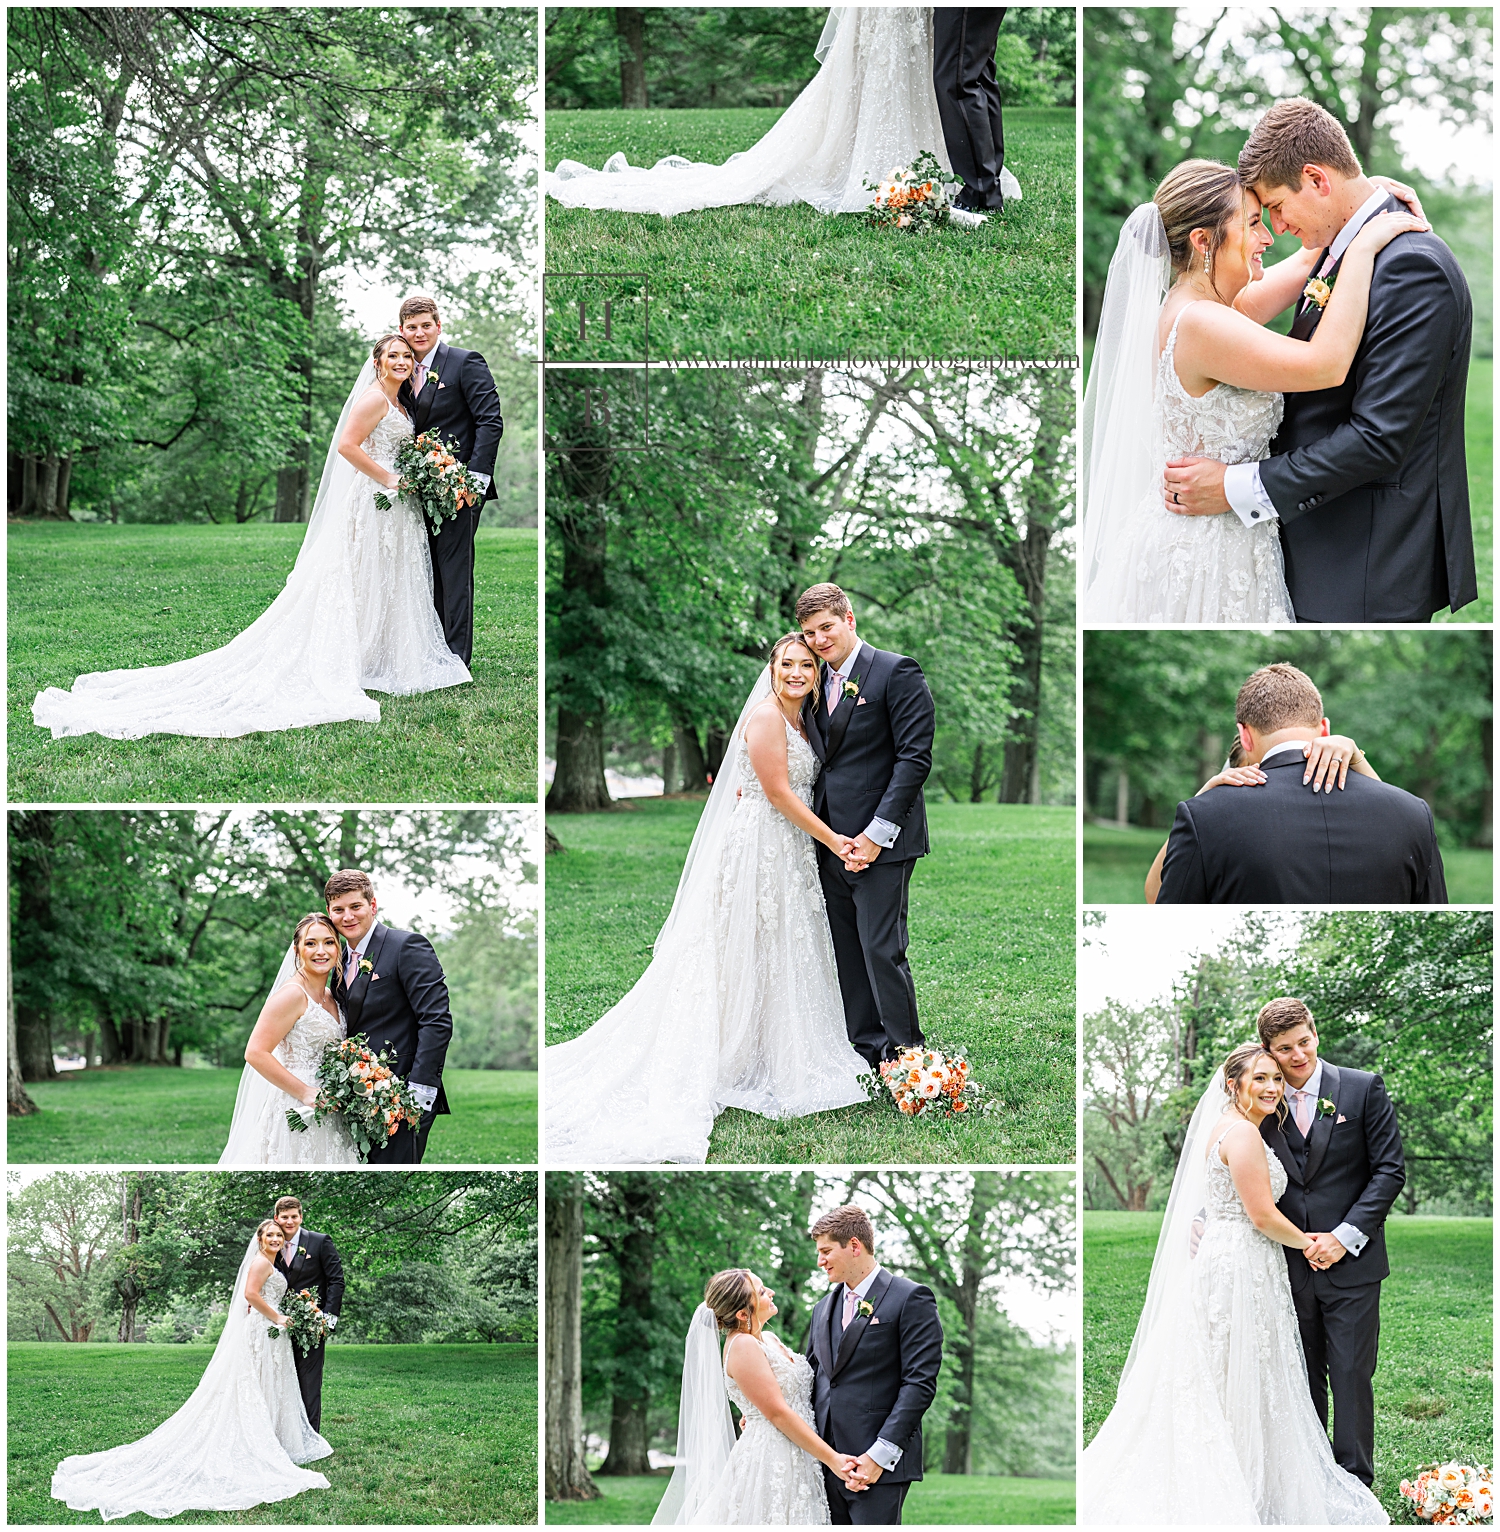 Collage of bride and groom portraits